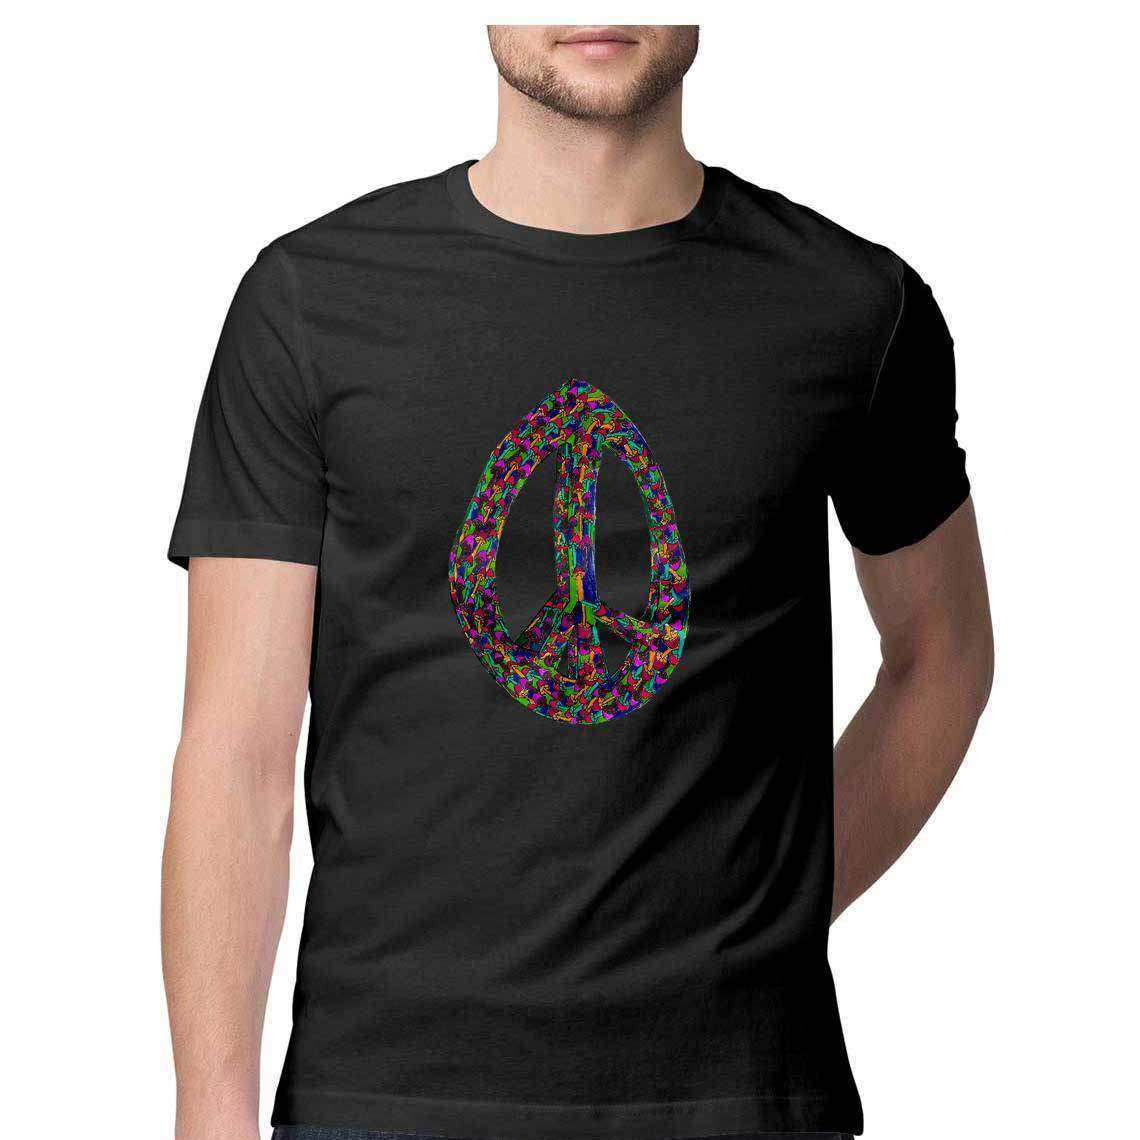 Peacefully Ecstatic Graphic T-Shirt - CBD Store India